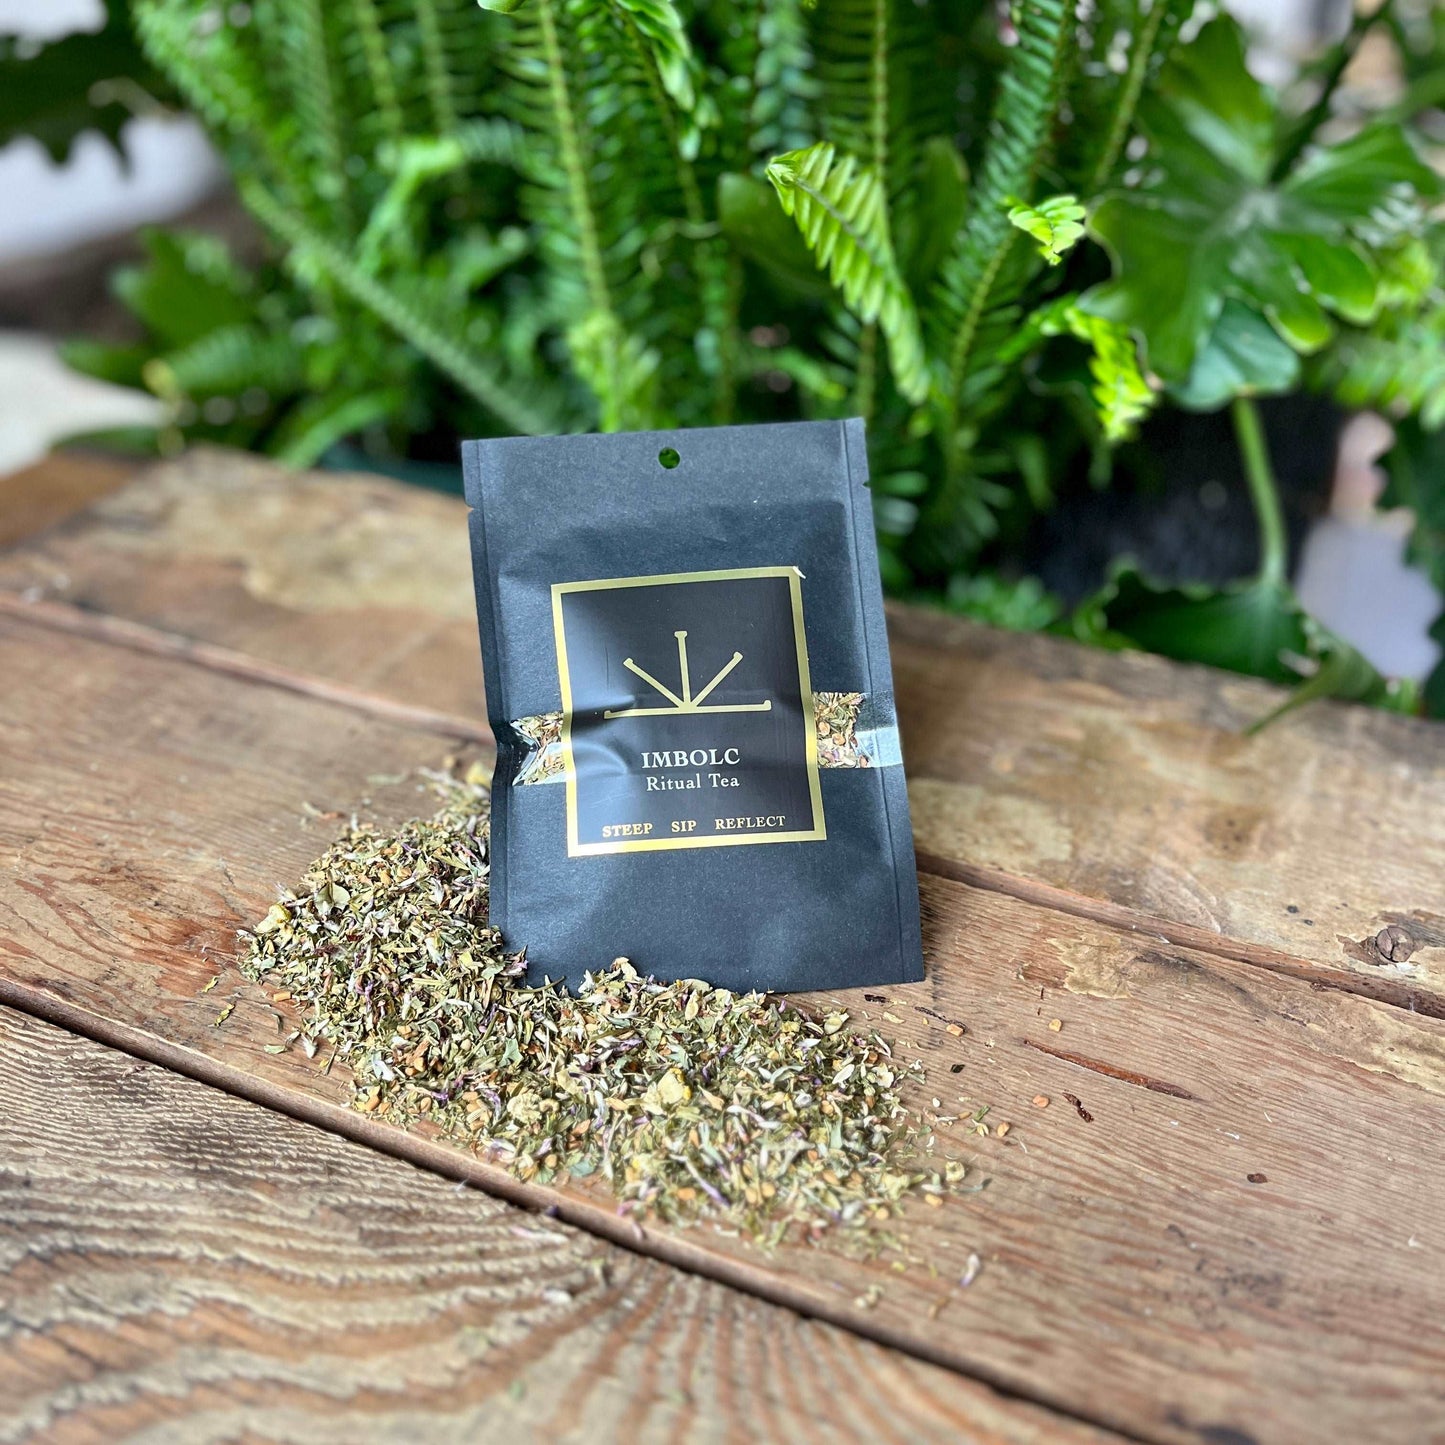 Embrace the spirit of Imbolc with our Imbolc | Potential Ritual Tea. This organic blend features fenugreek seed, alfalfa, milk thistle, red clover, chamomile, and fennel. Crafted to align with the energies of renewal and growth, this herbal infusion offers a light and soothing experience during your Imbolc rituals. Sip and celebrate the awakening of spring with this thoughtfully blended tea.